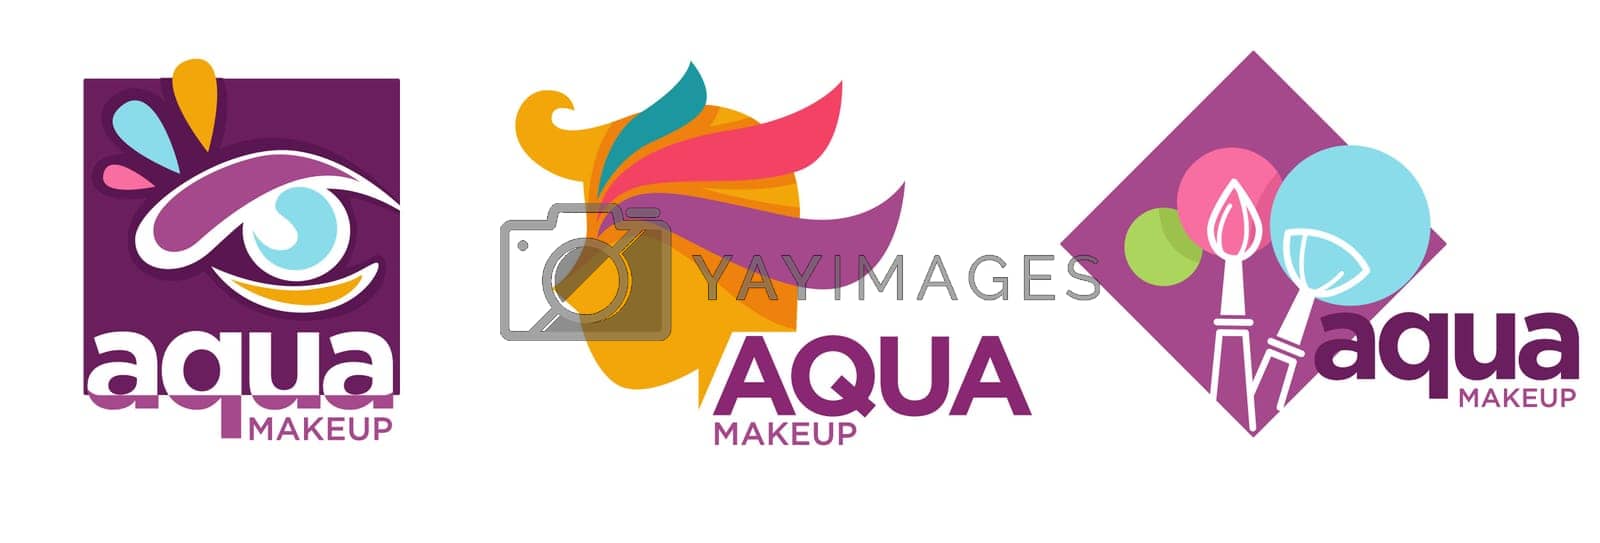 Royalty free image of Aqua makeup, emblem for beauty salon vector icon by Sonulkaster